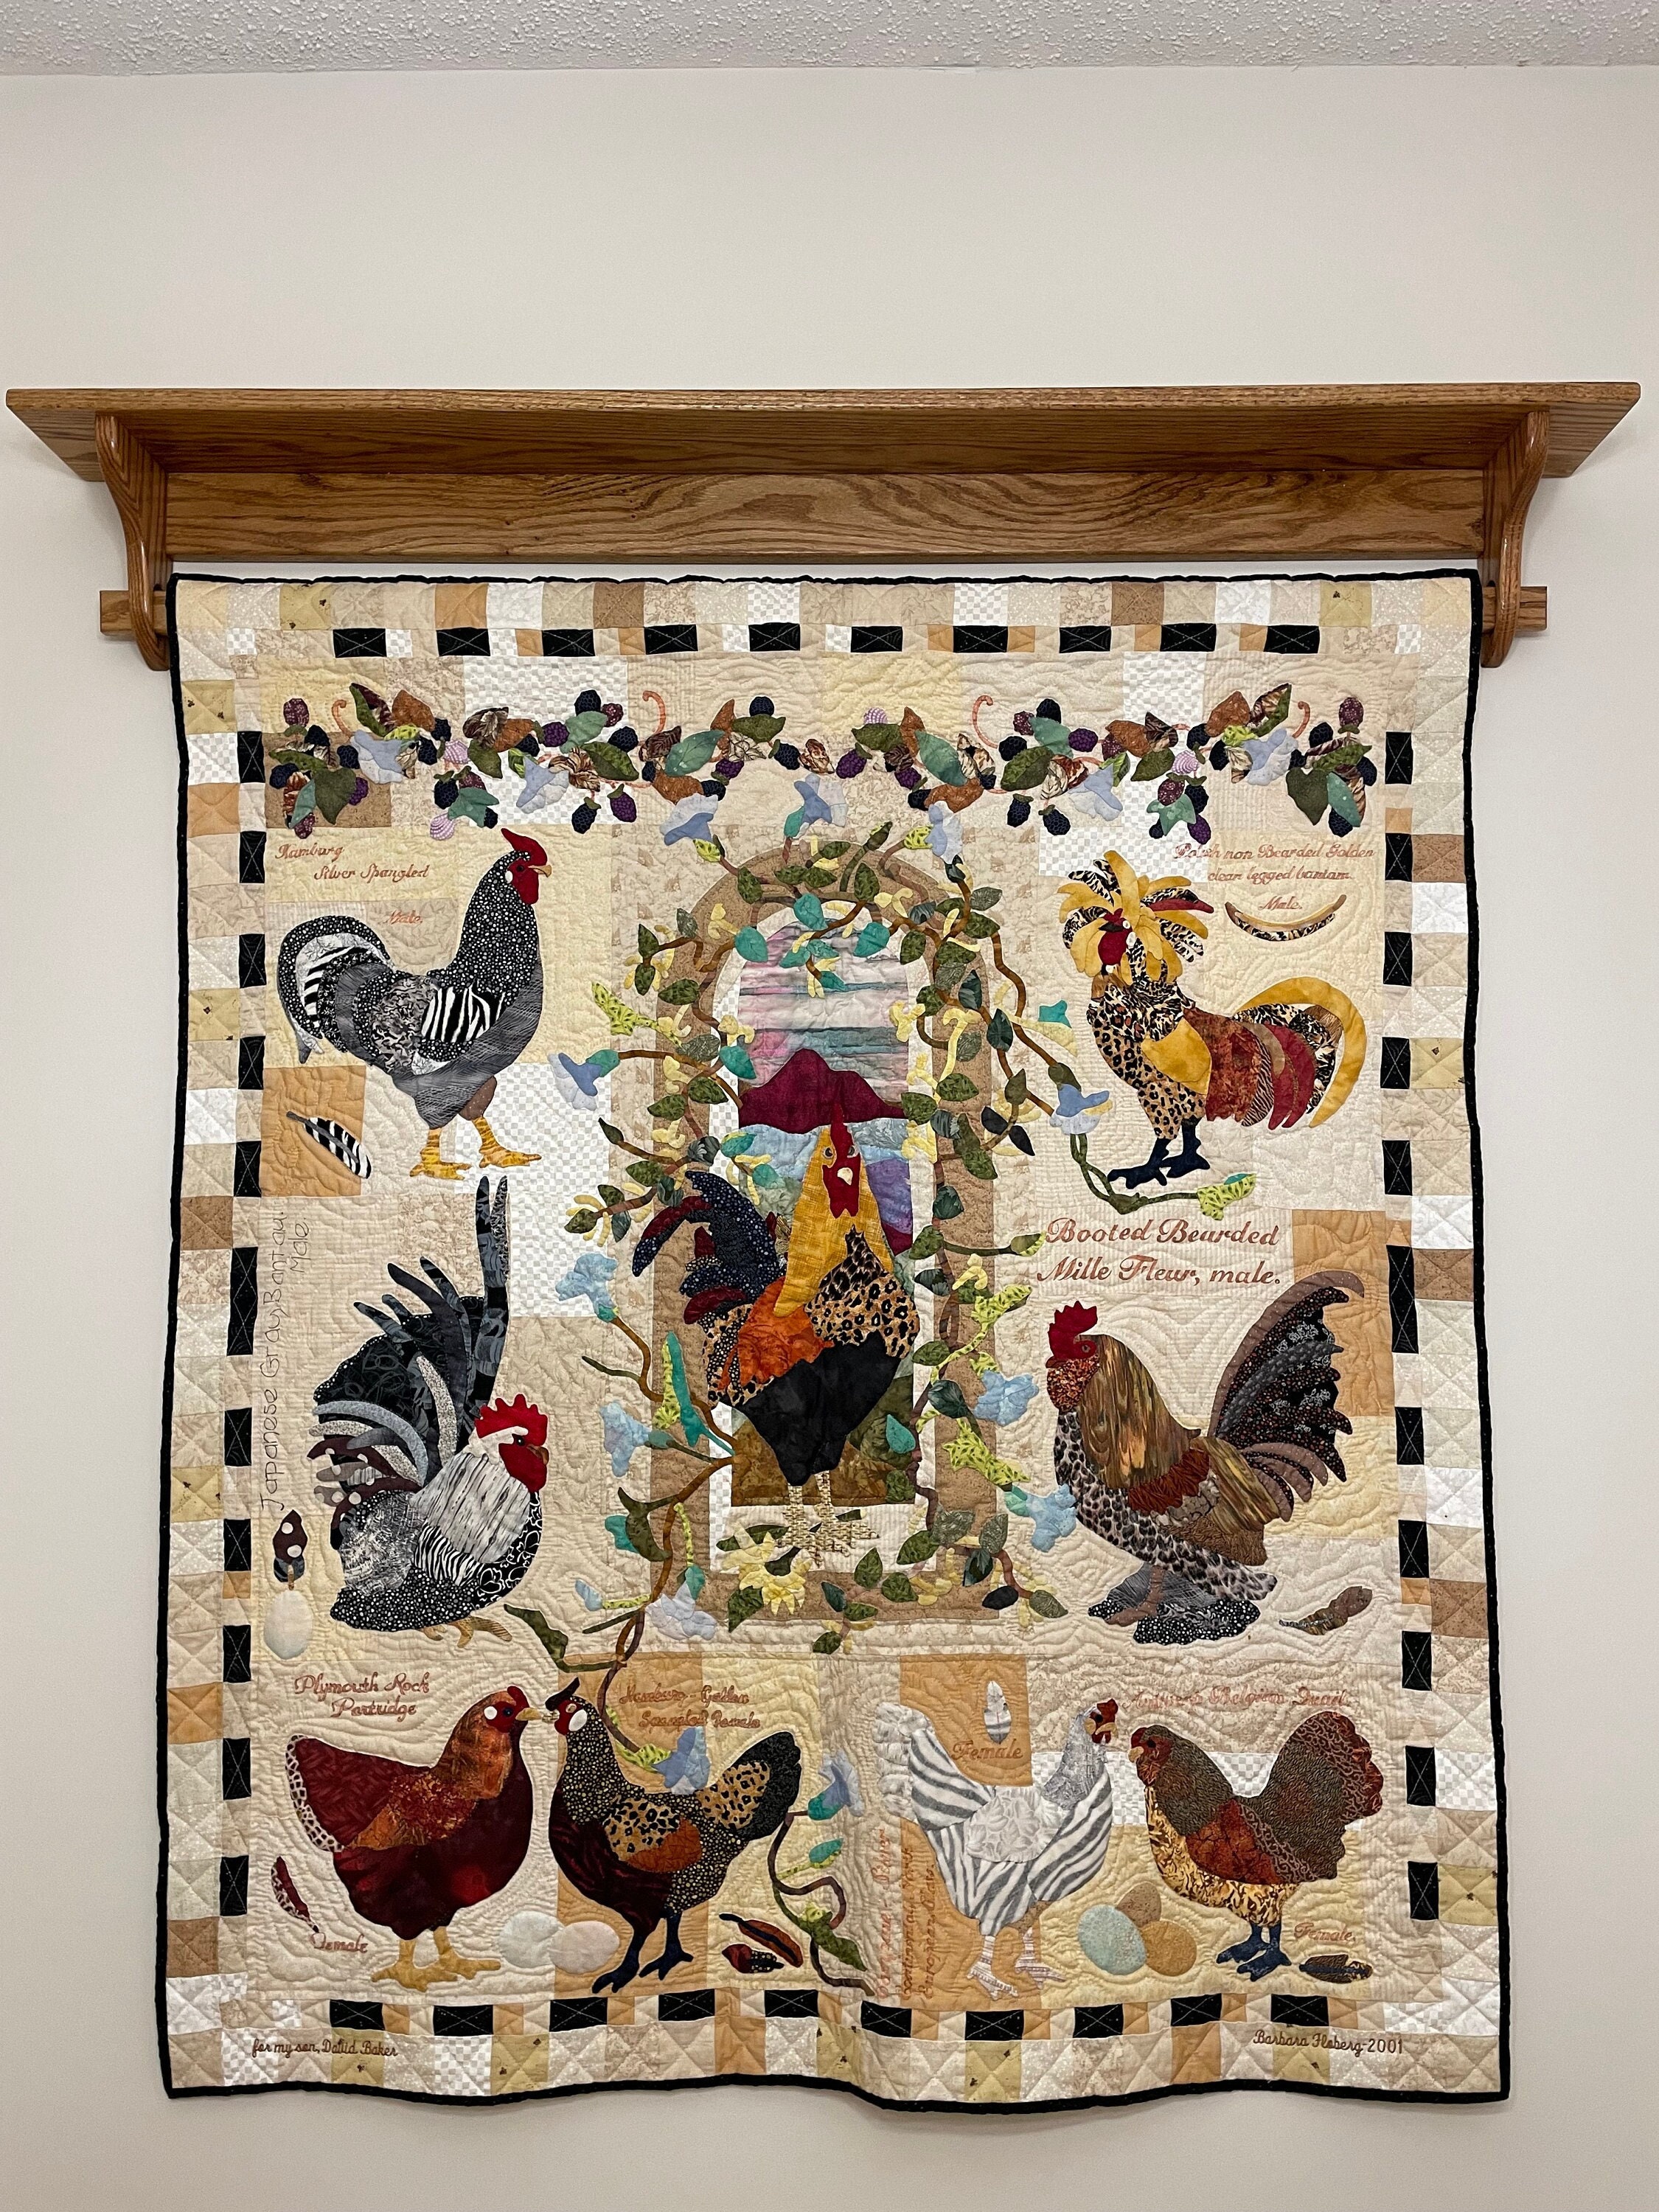 Buy Custom Wall Hanging Quilt Hanger, made to order from Appletree